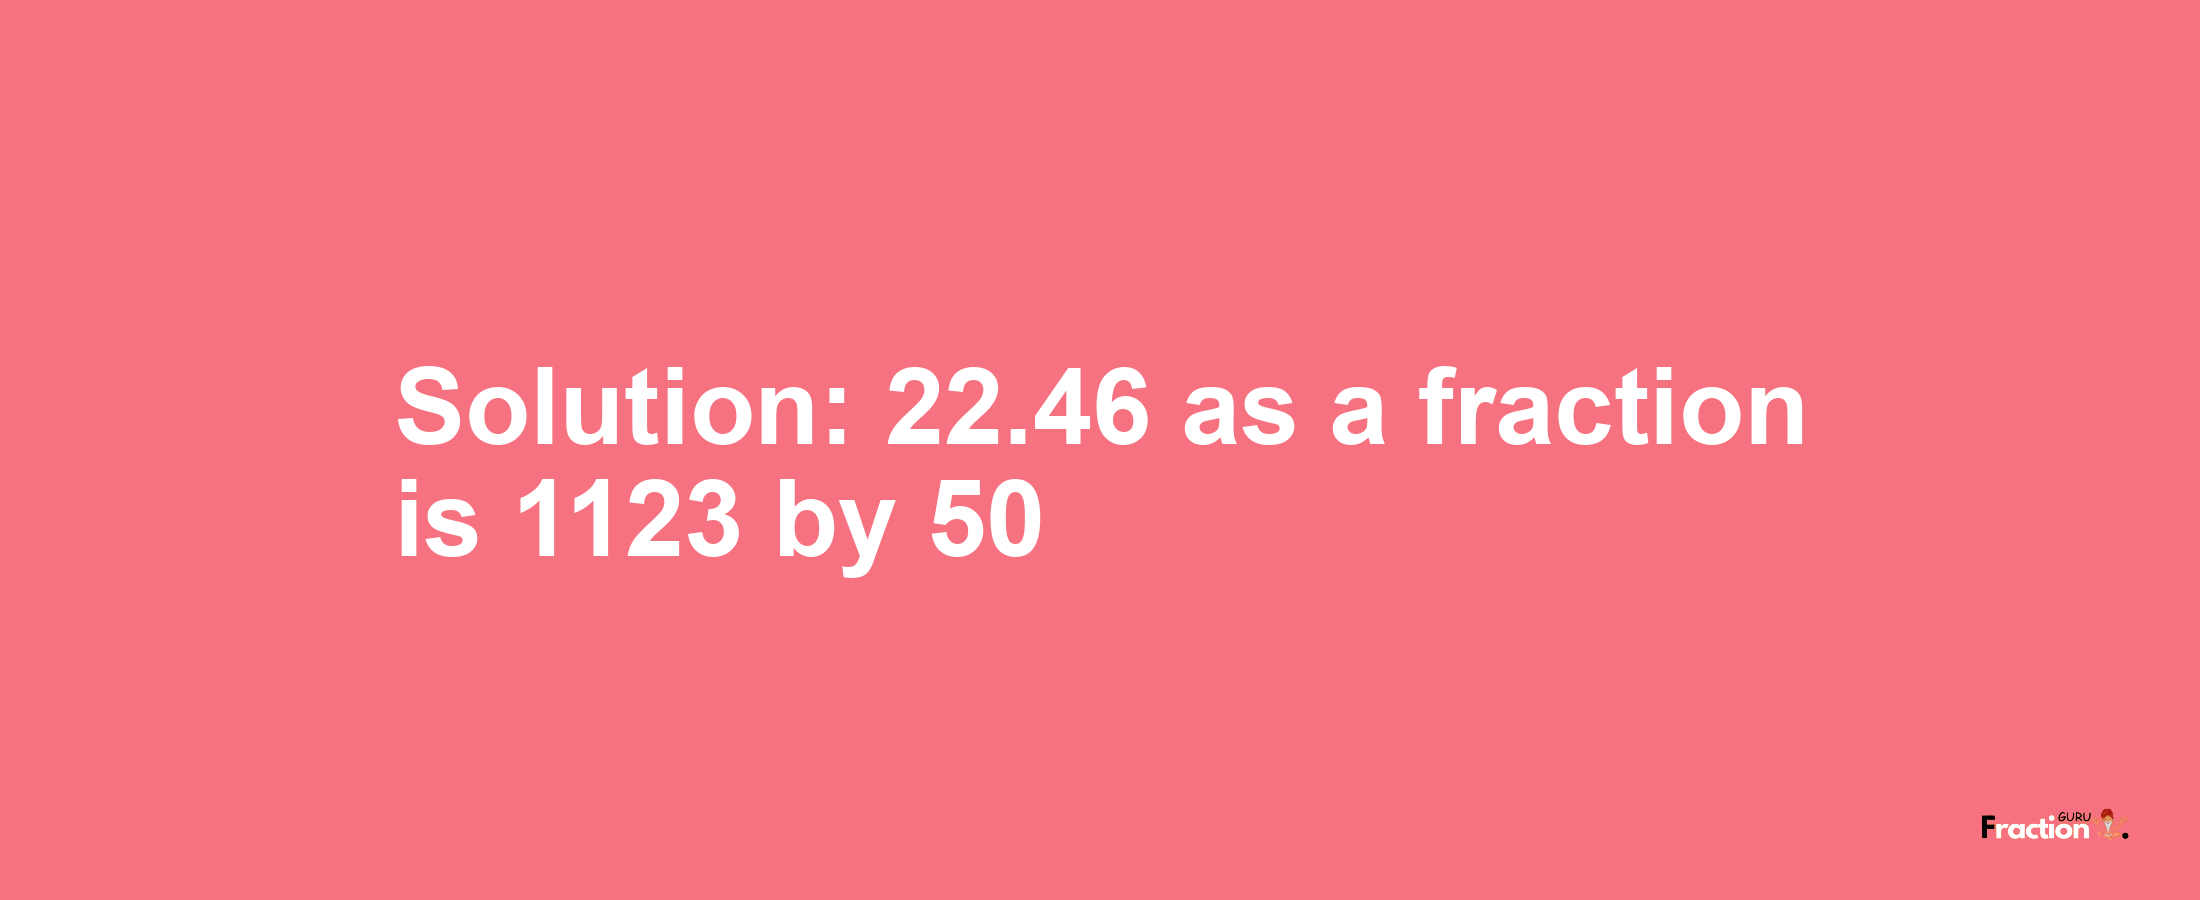 Solution:22.46 as a fraction is 1123/50